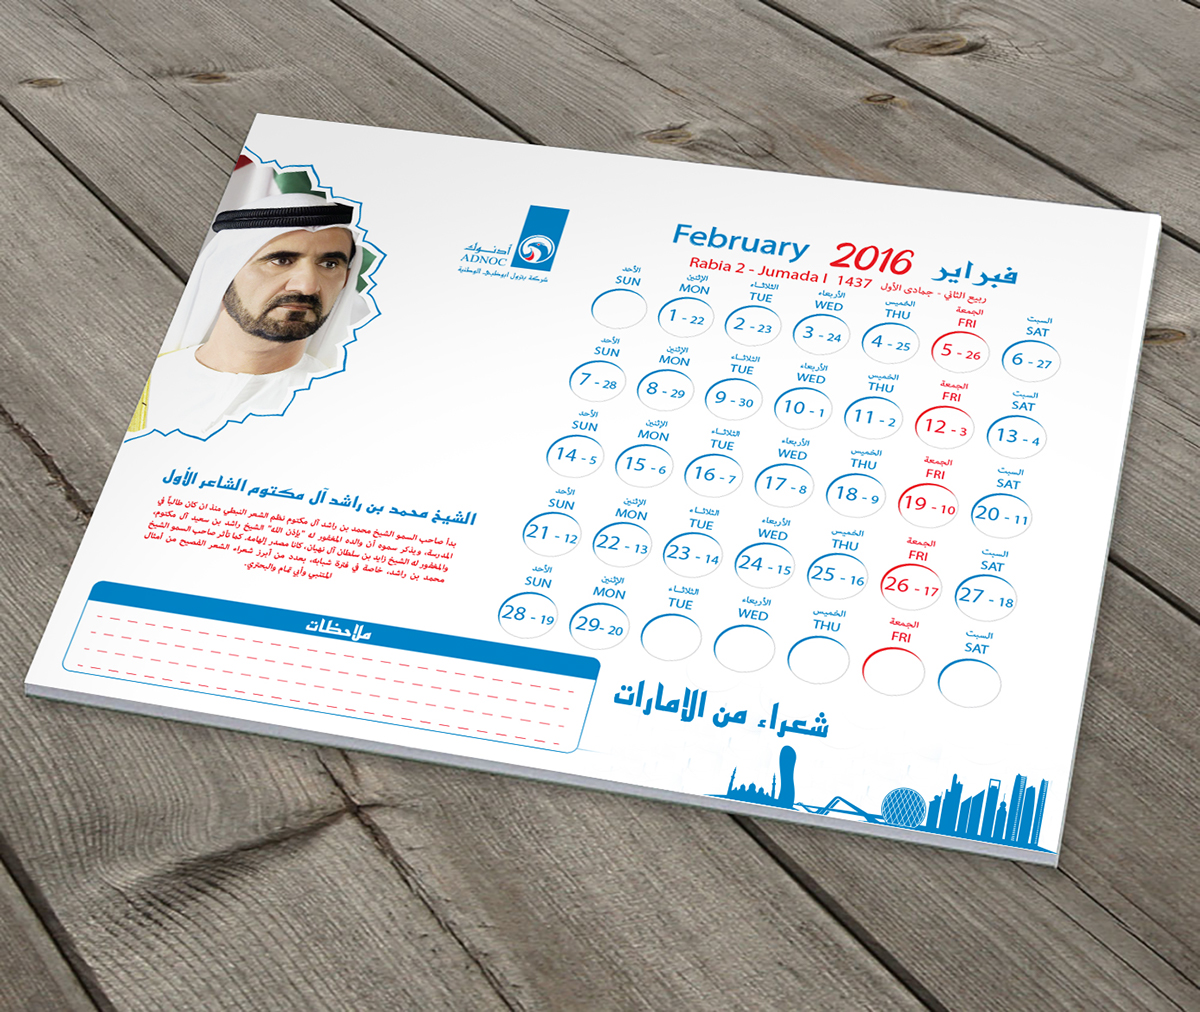 Idea For Calendar " 2015 © All Rights Reserved Calender idea spring creative Mockup Work  Love